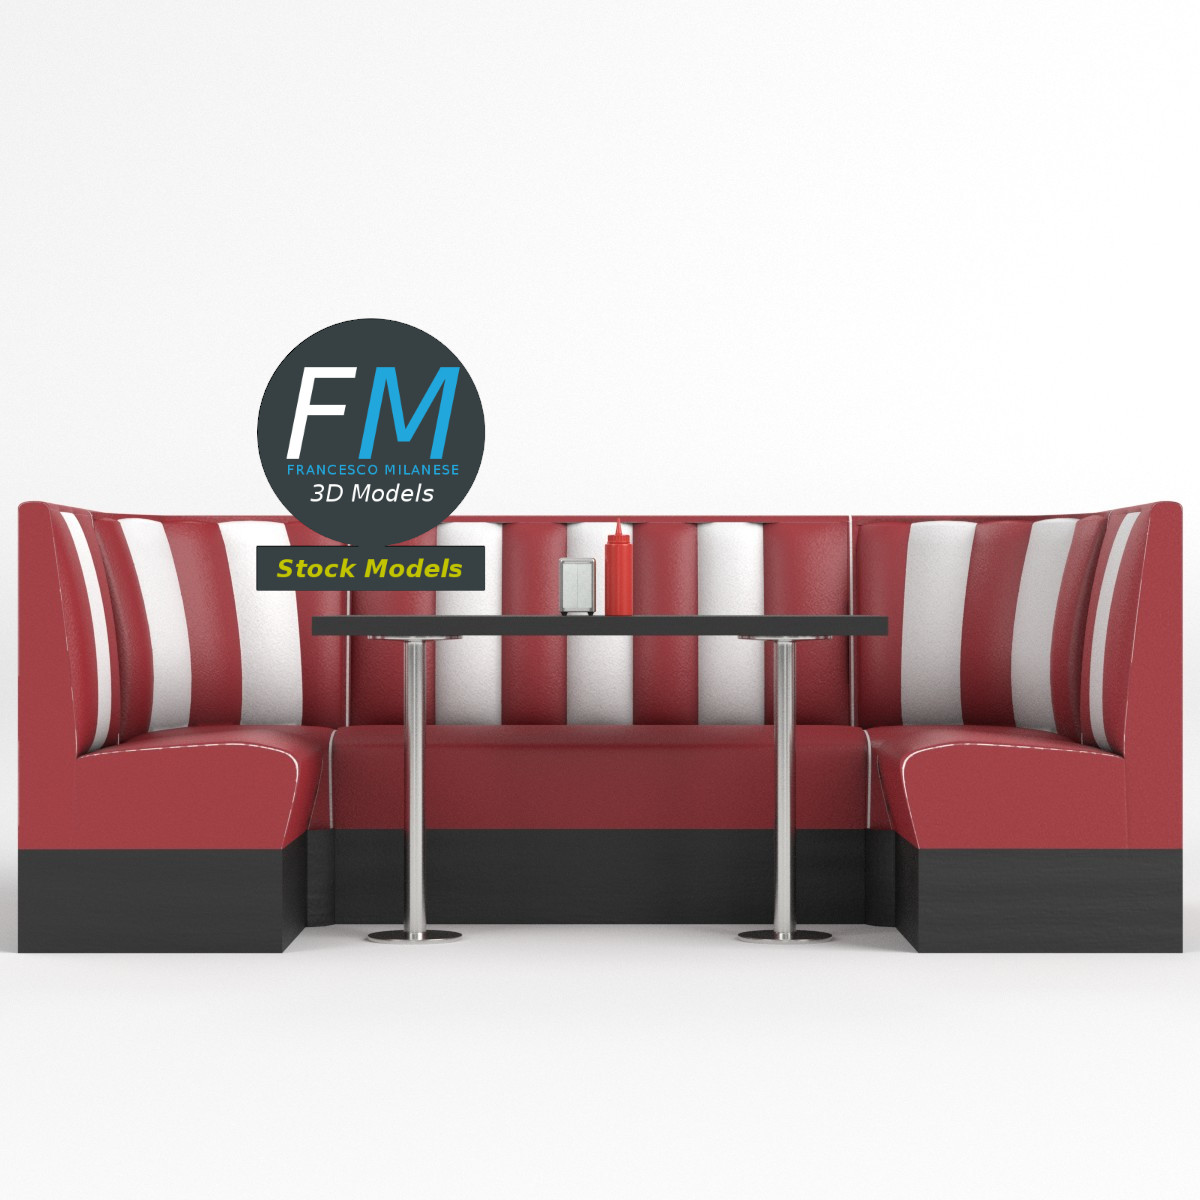 Food Service Seating- Booth Set for Restaurant or Food Service 3D model